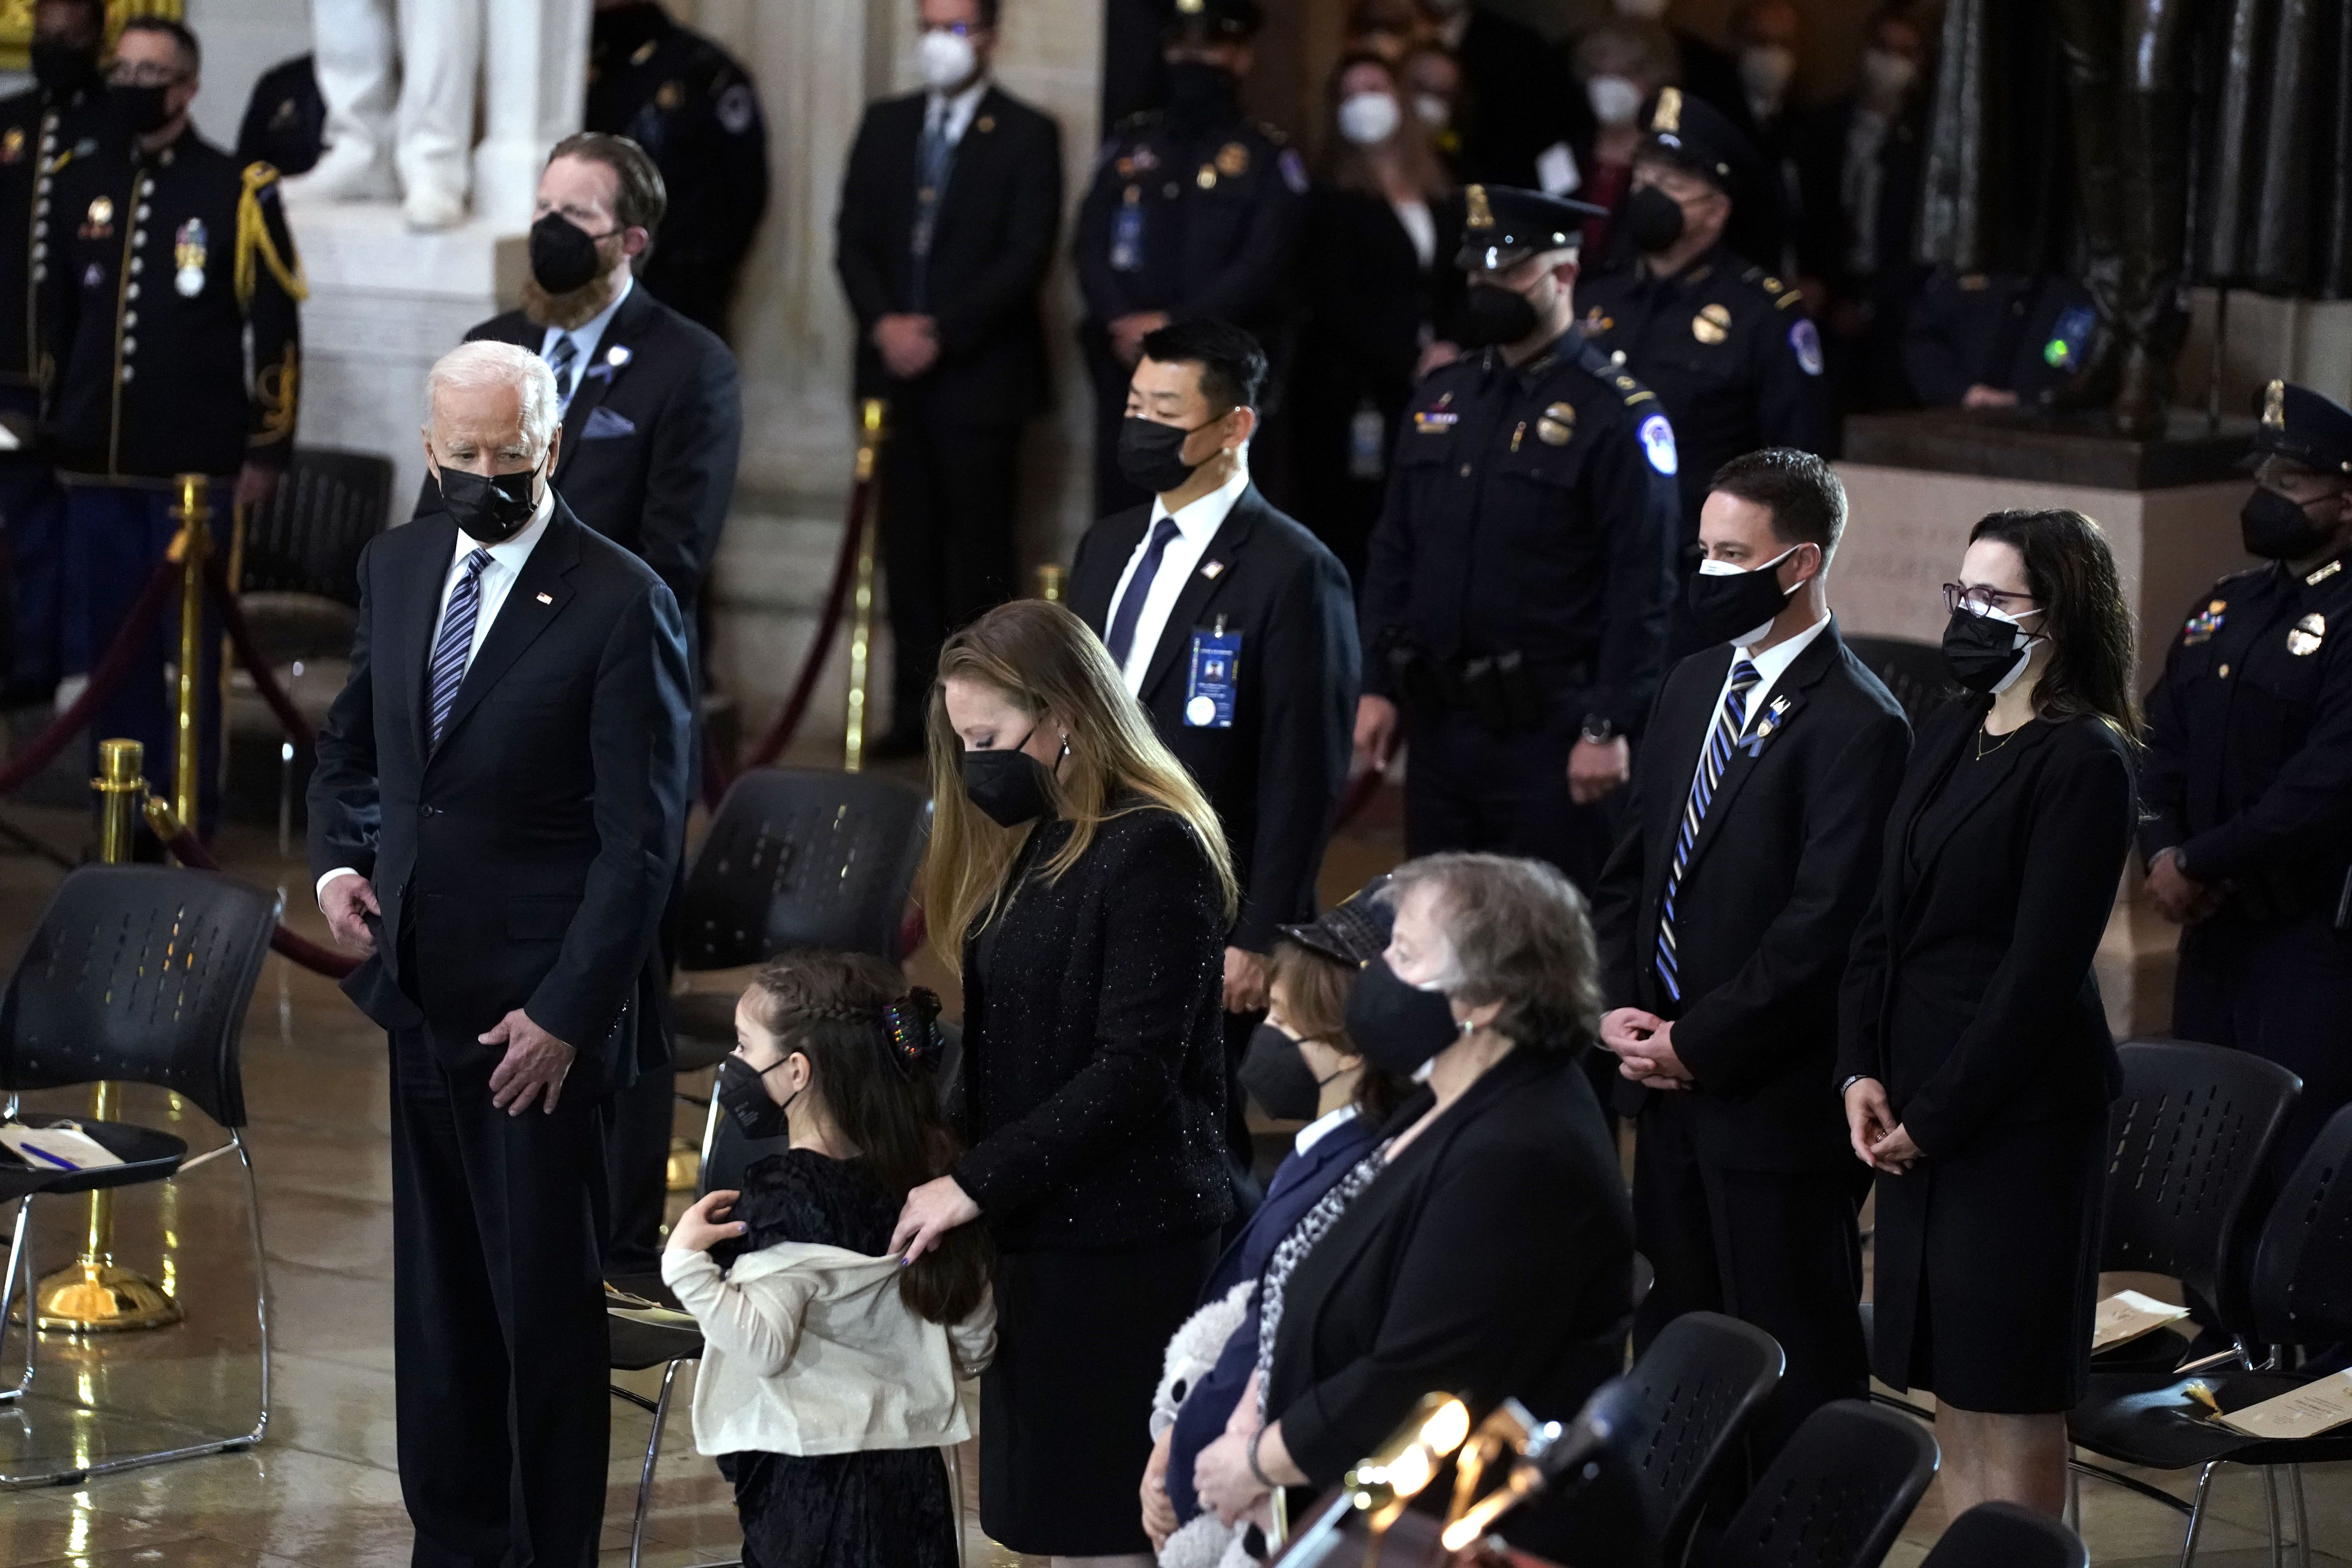 Biden looks on at Evans' family. Photo: Amr Alfiky-Pool/Getty Image